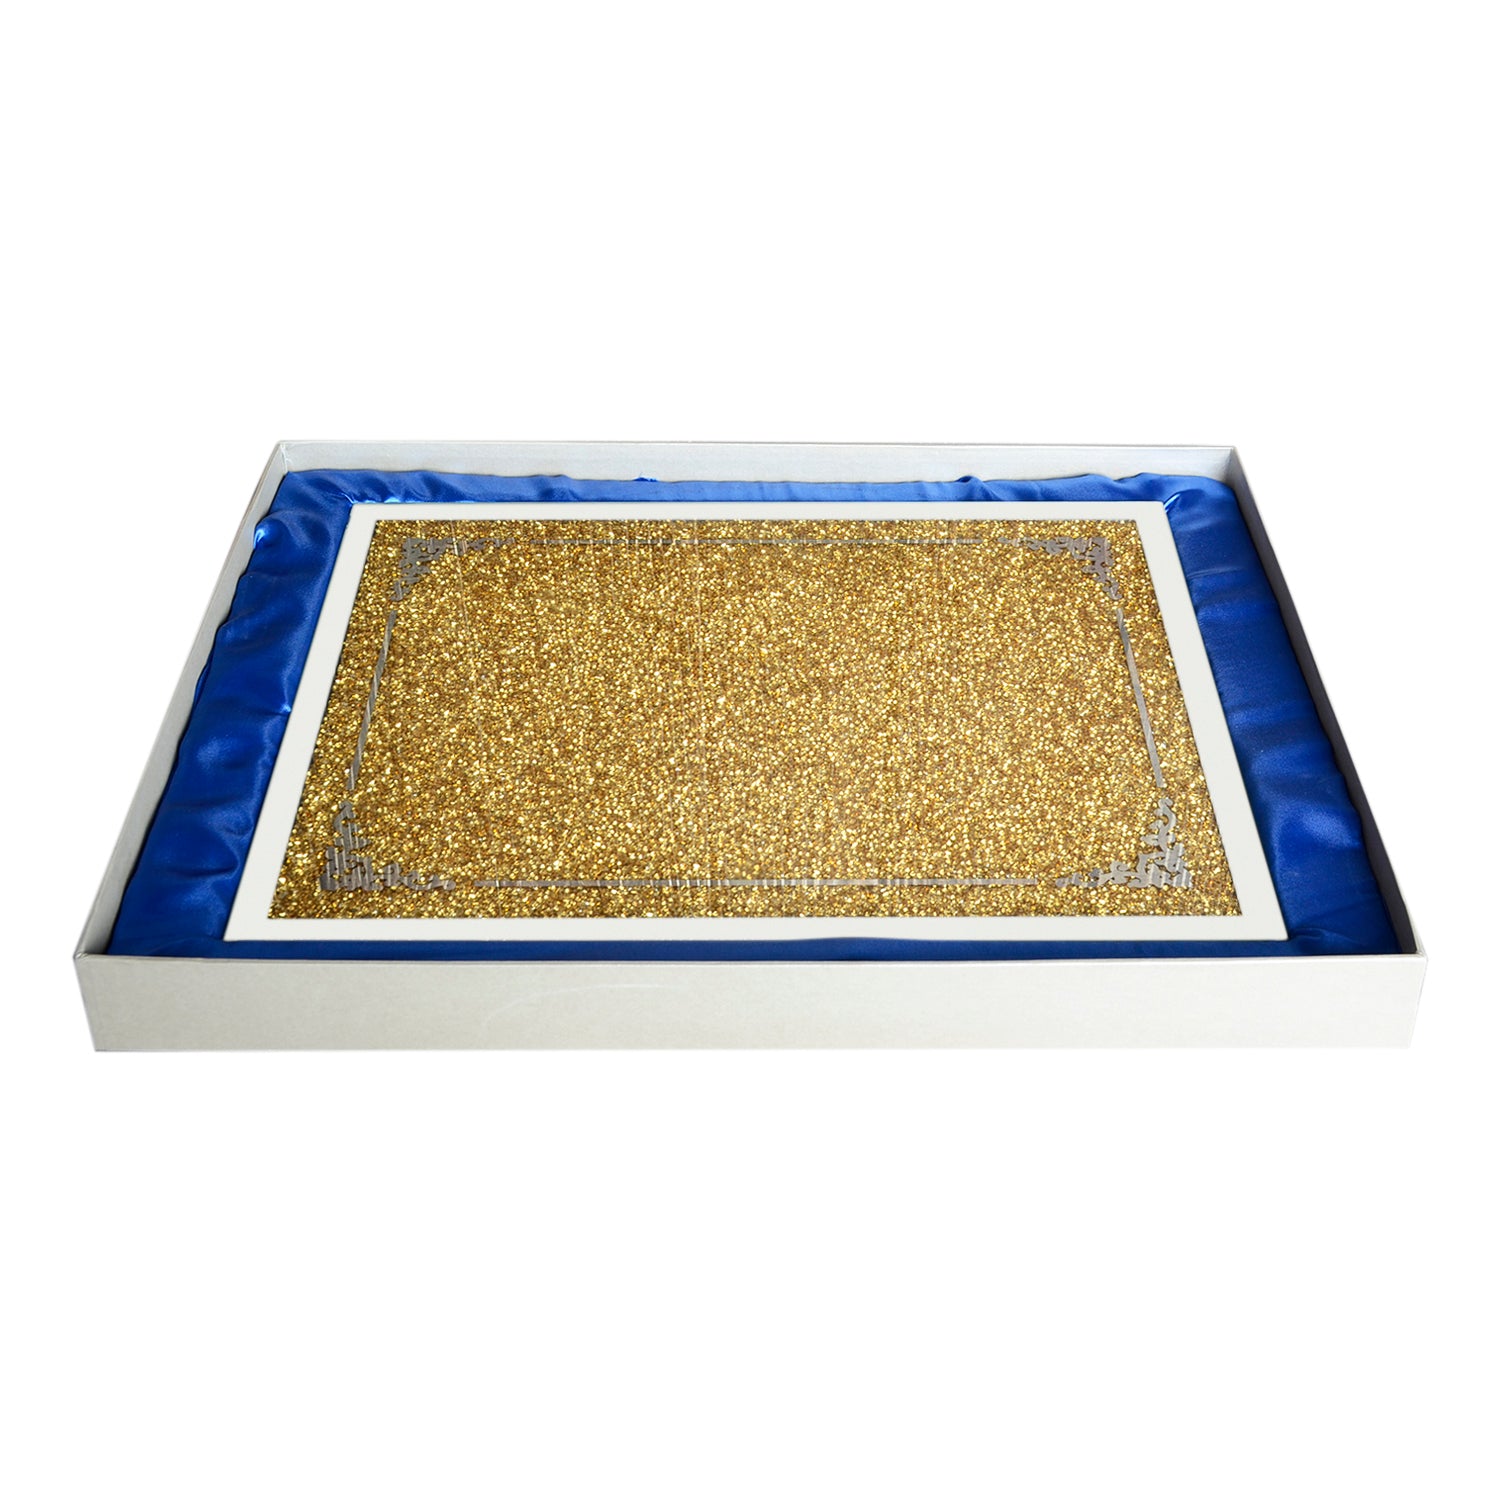 Ambrose Exquisite Glass Serving Tray in Gift Box gold-glass